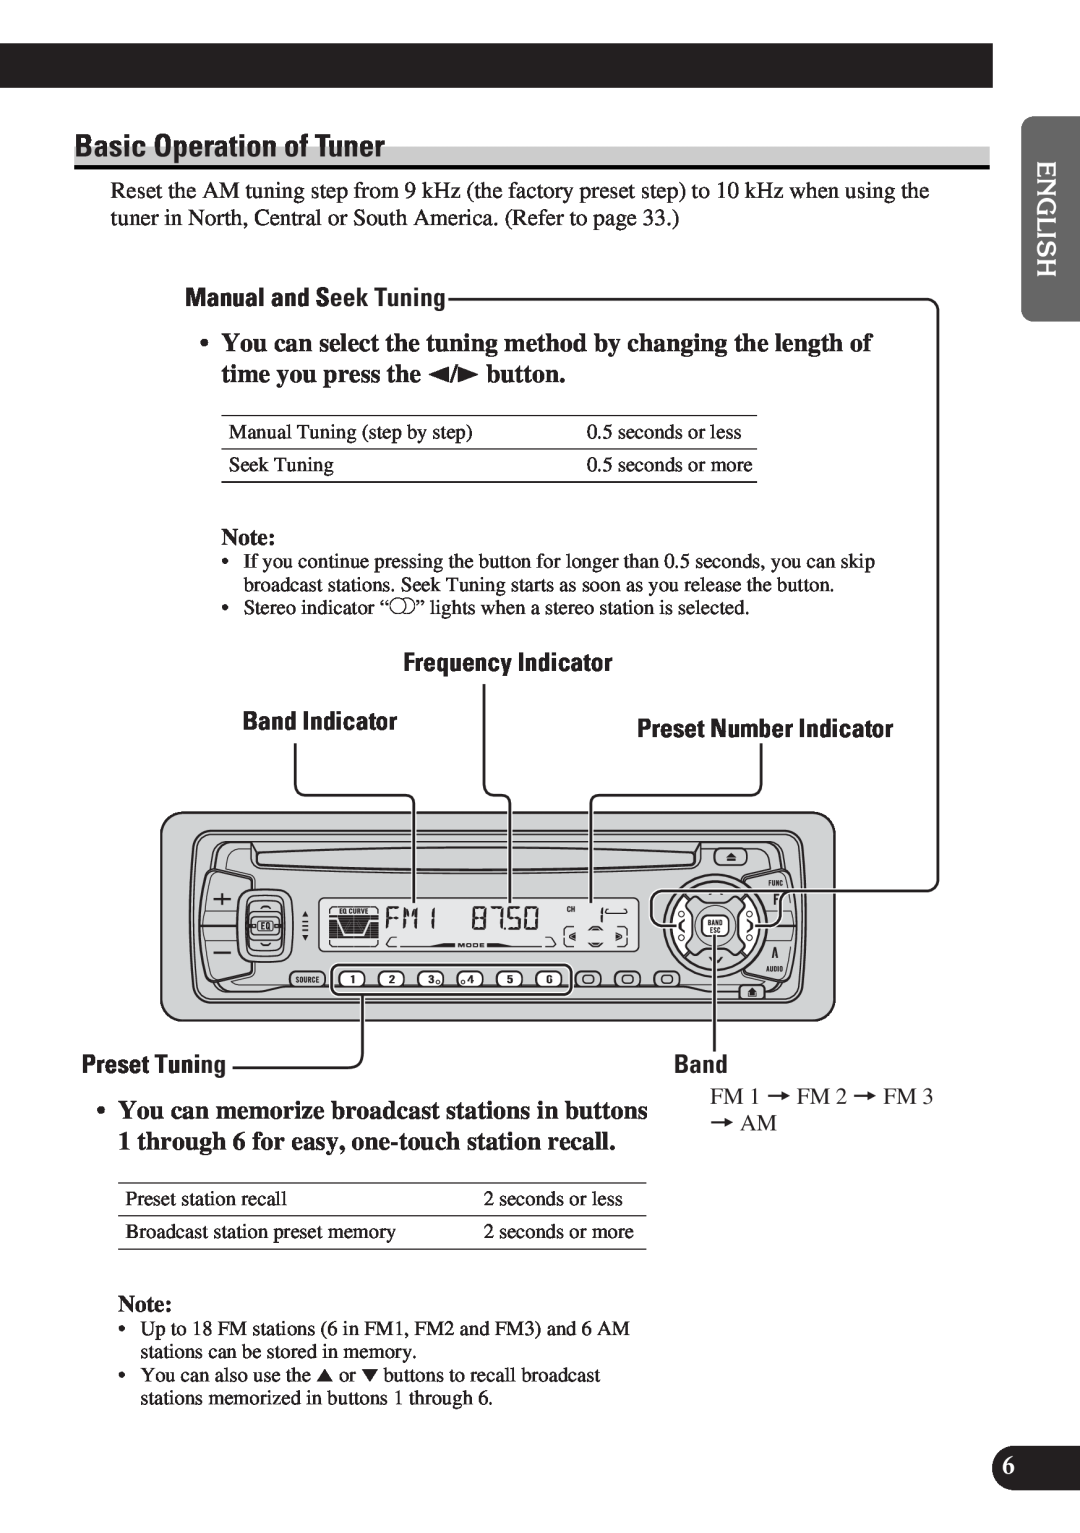 Pioneer DEH-P3150-B Basic Operation of Tuner, Manual and Seek Tuning, Frequency Indicator, Preset Tuning, Band, Italiano 